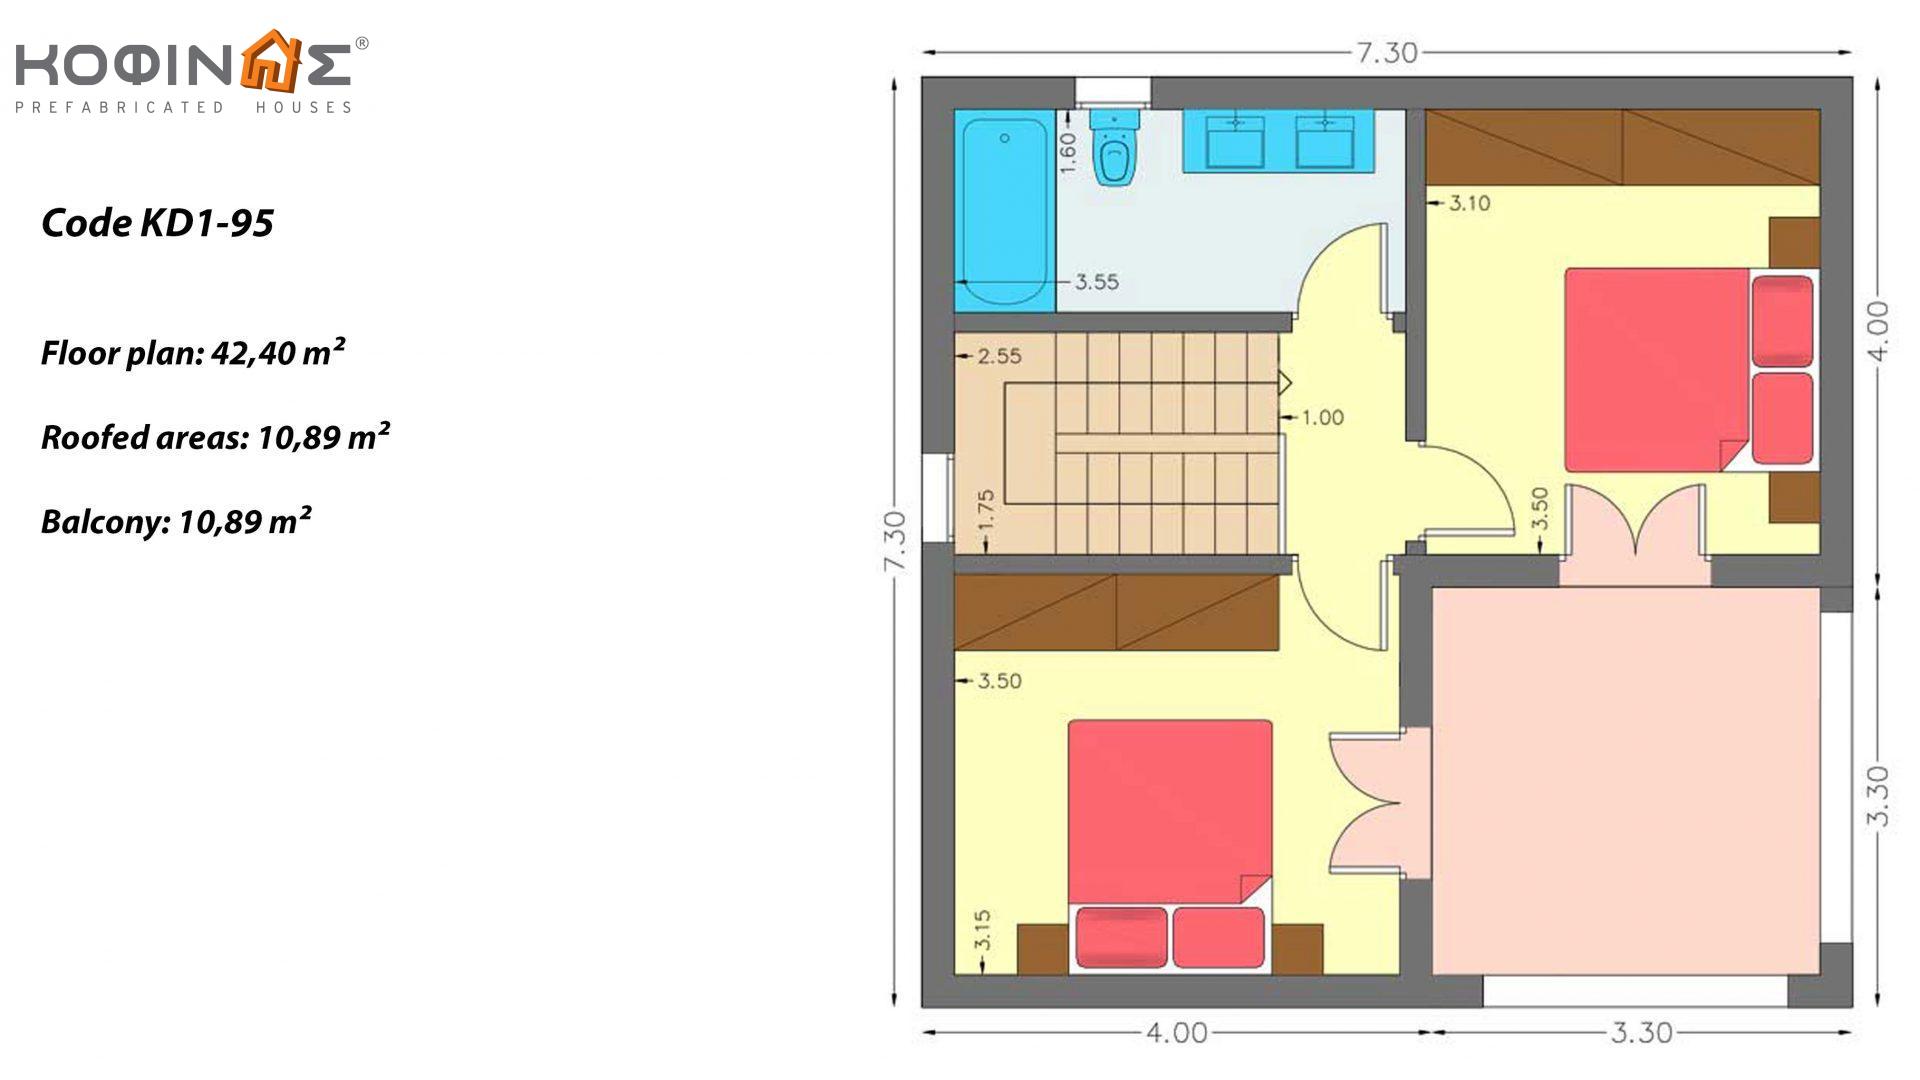 2-story house KD1-95, total surface of 95,70 m²,covered roofed areas 19.23 m²,balconies 10.89 m²